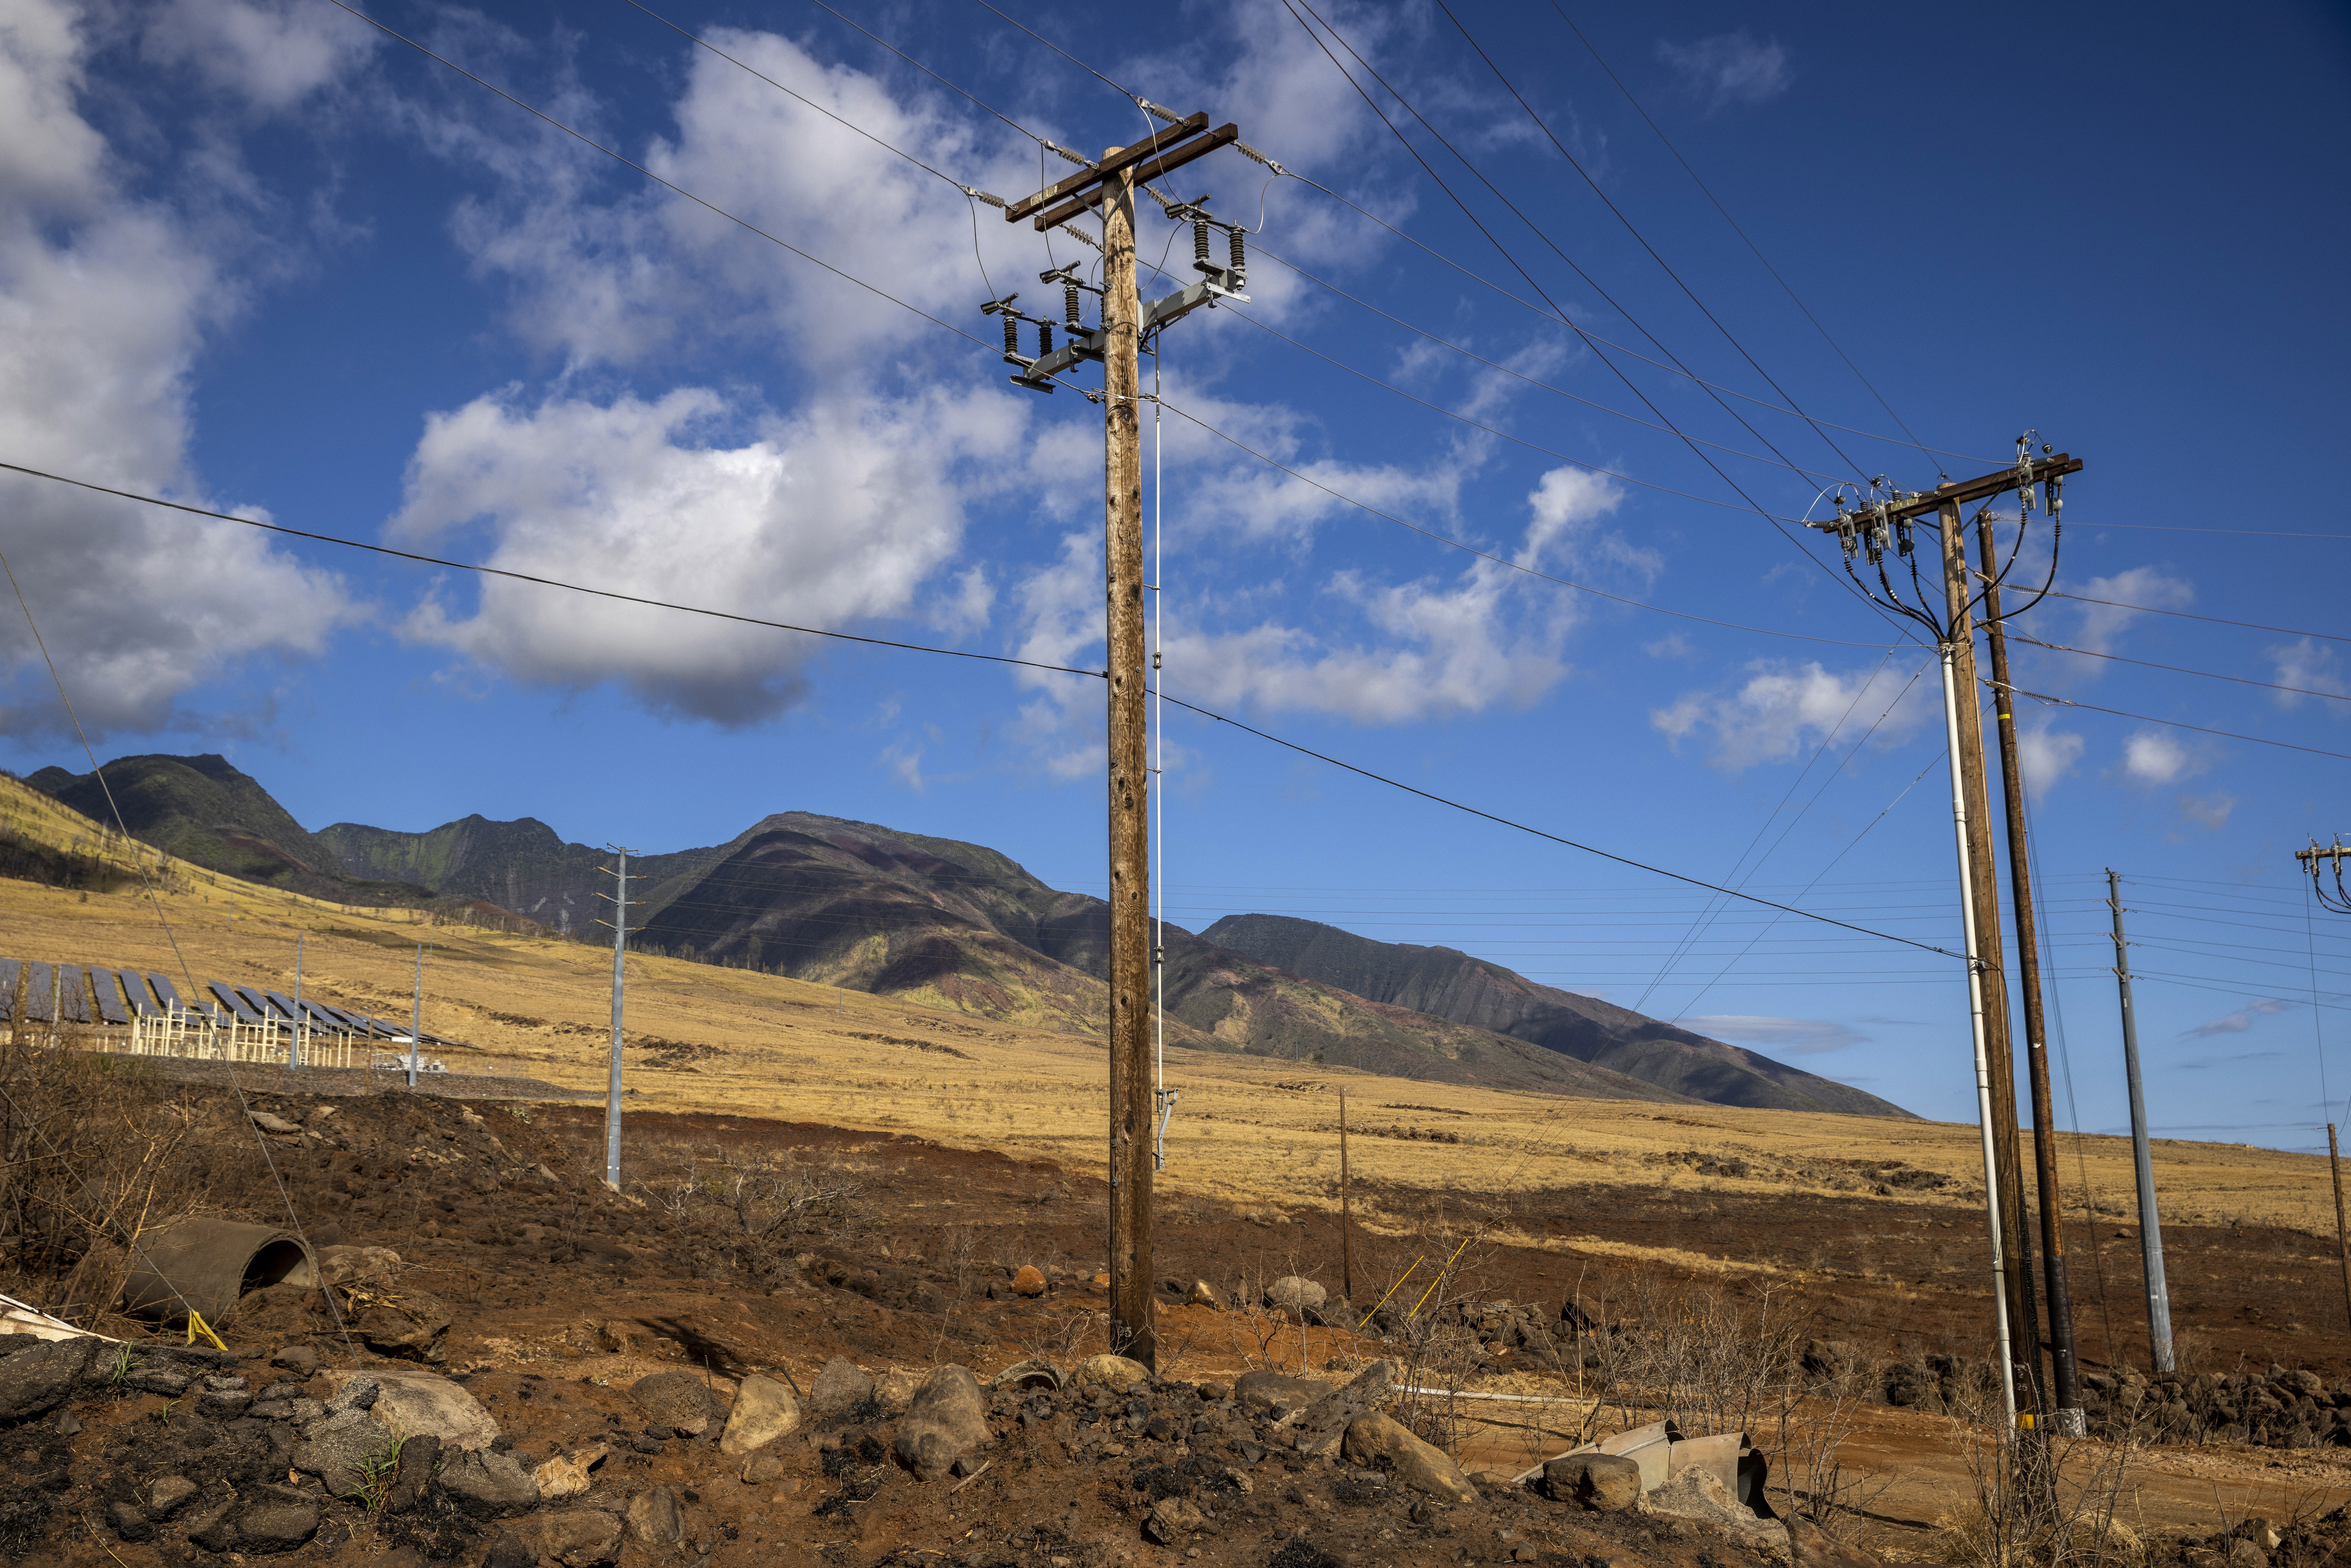 Bare electrical wire and leaning poles on Maui were possible cause of  deadly fires